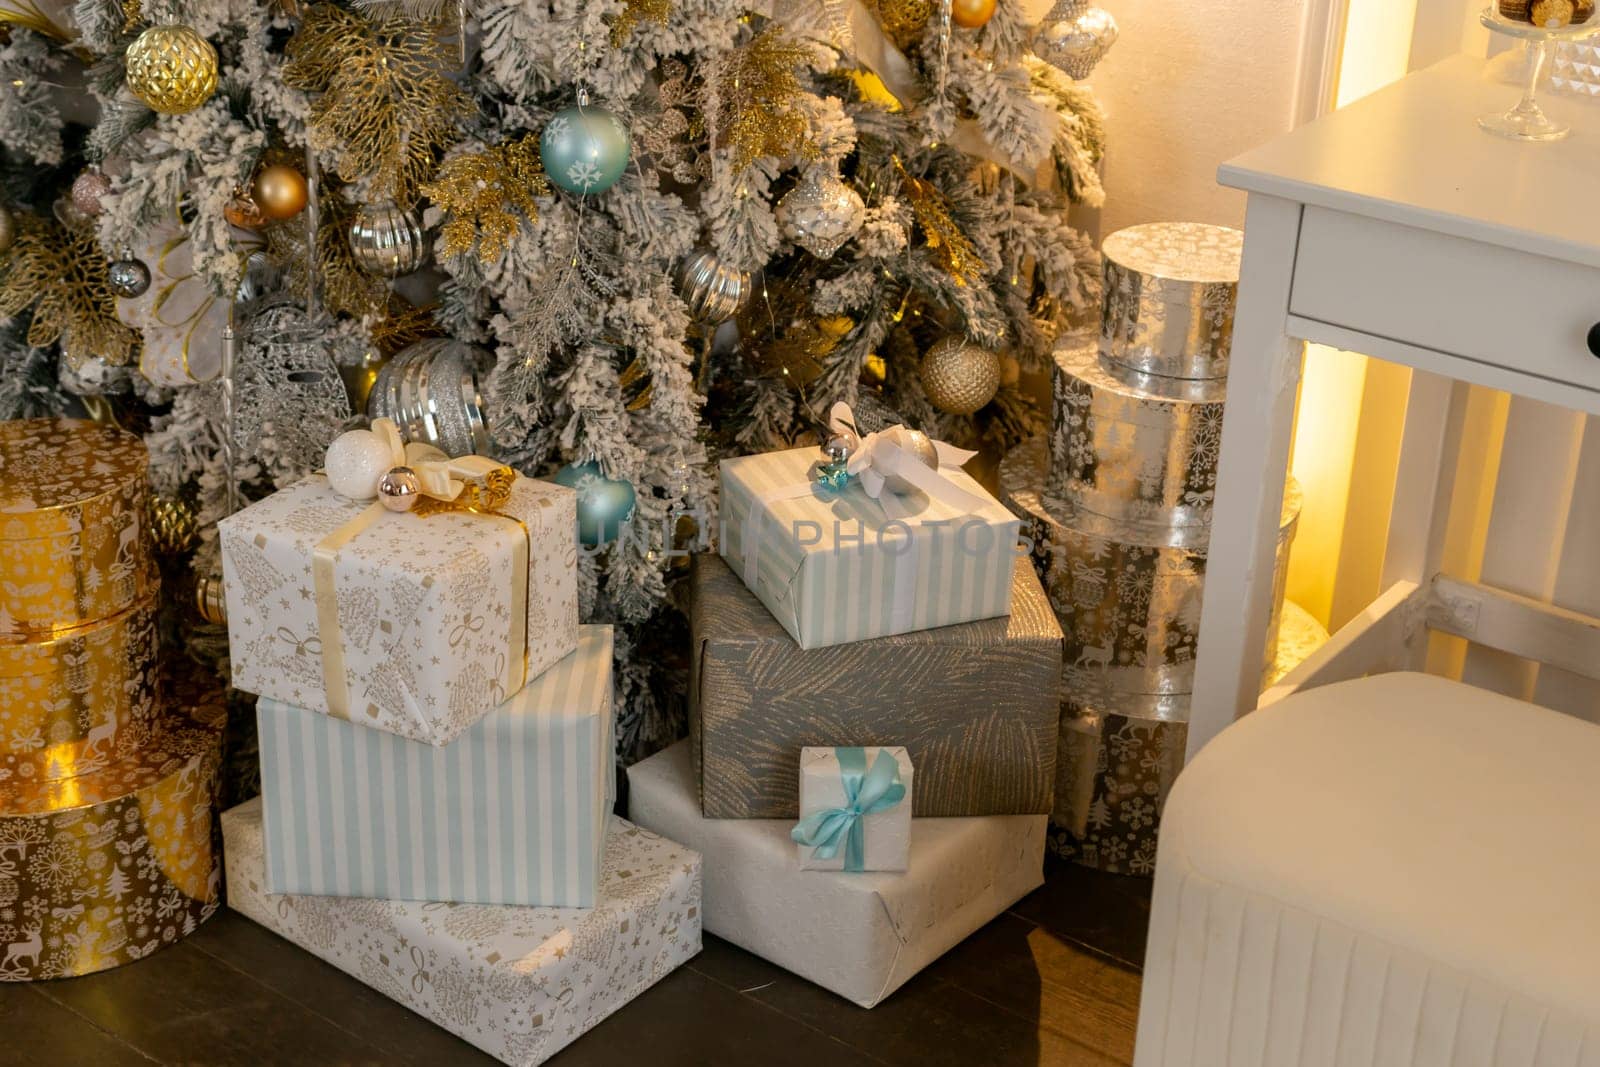 A Christmas tree with many gifts stacked on top of it. The gifts are wrapped in white paper and blue and gold ribbons